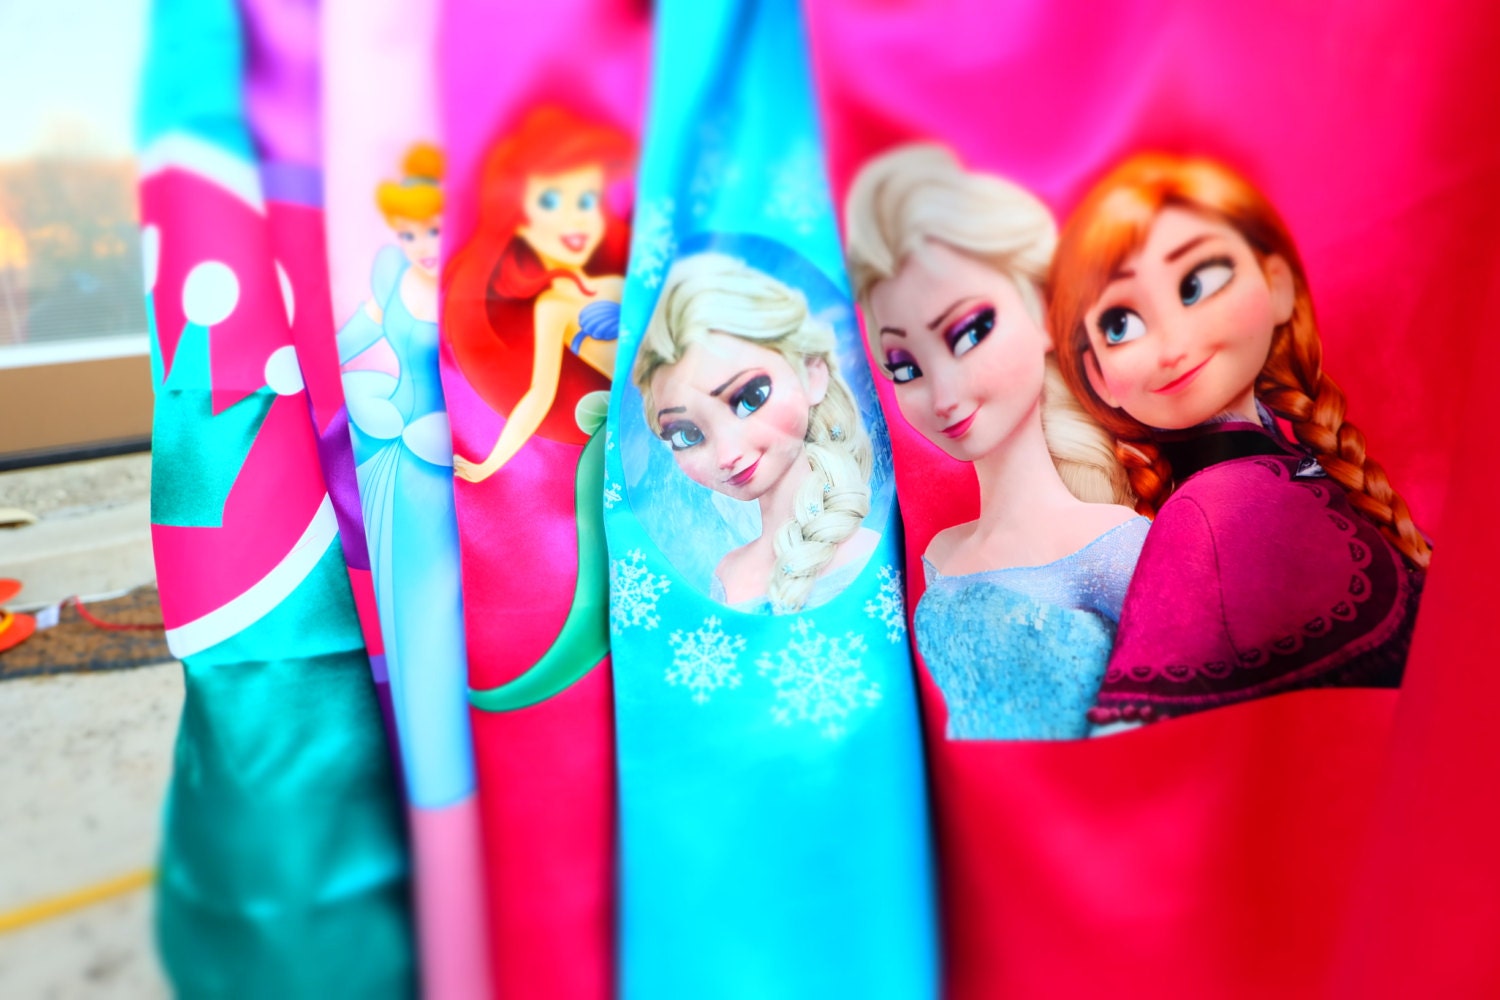 File:Frozen cosplay, Elsa and Hans.jpg - Wikimedia Commons